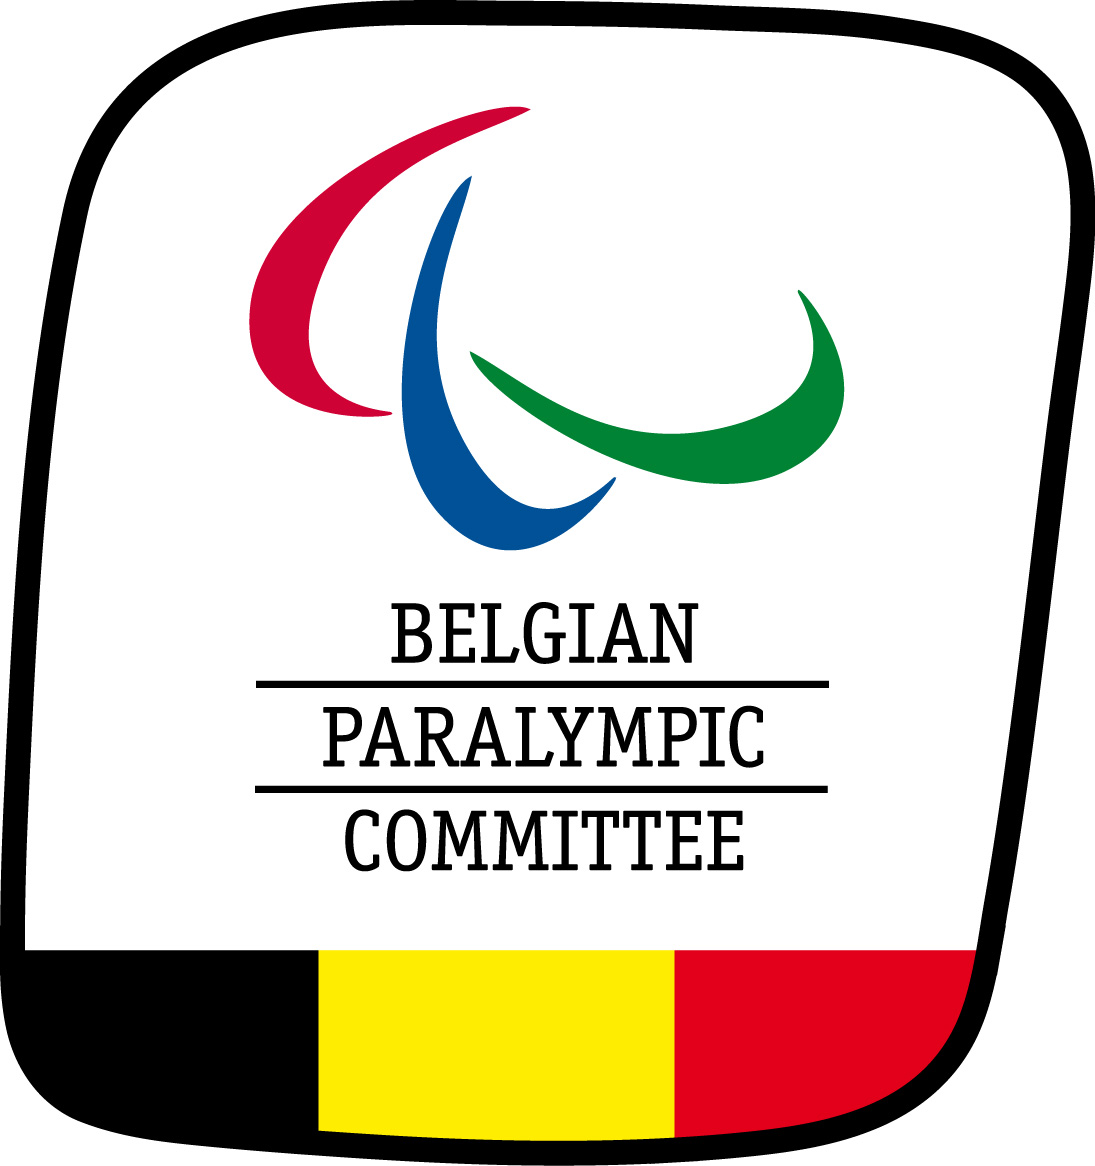 The Belgian Paralympic Committee have appointed Olek Kazimirowski as their Chef de Mission for the 2016 Paralympic Games in Rio de Janeiro ©Belgian Paralympic Committee